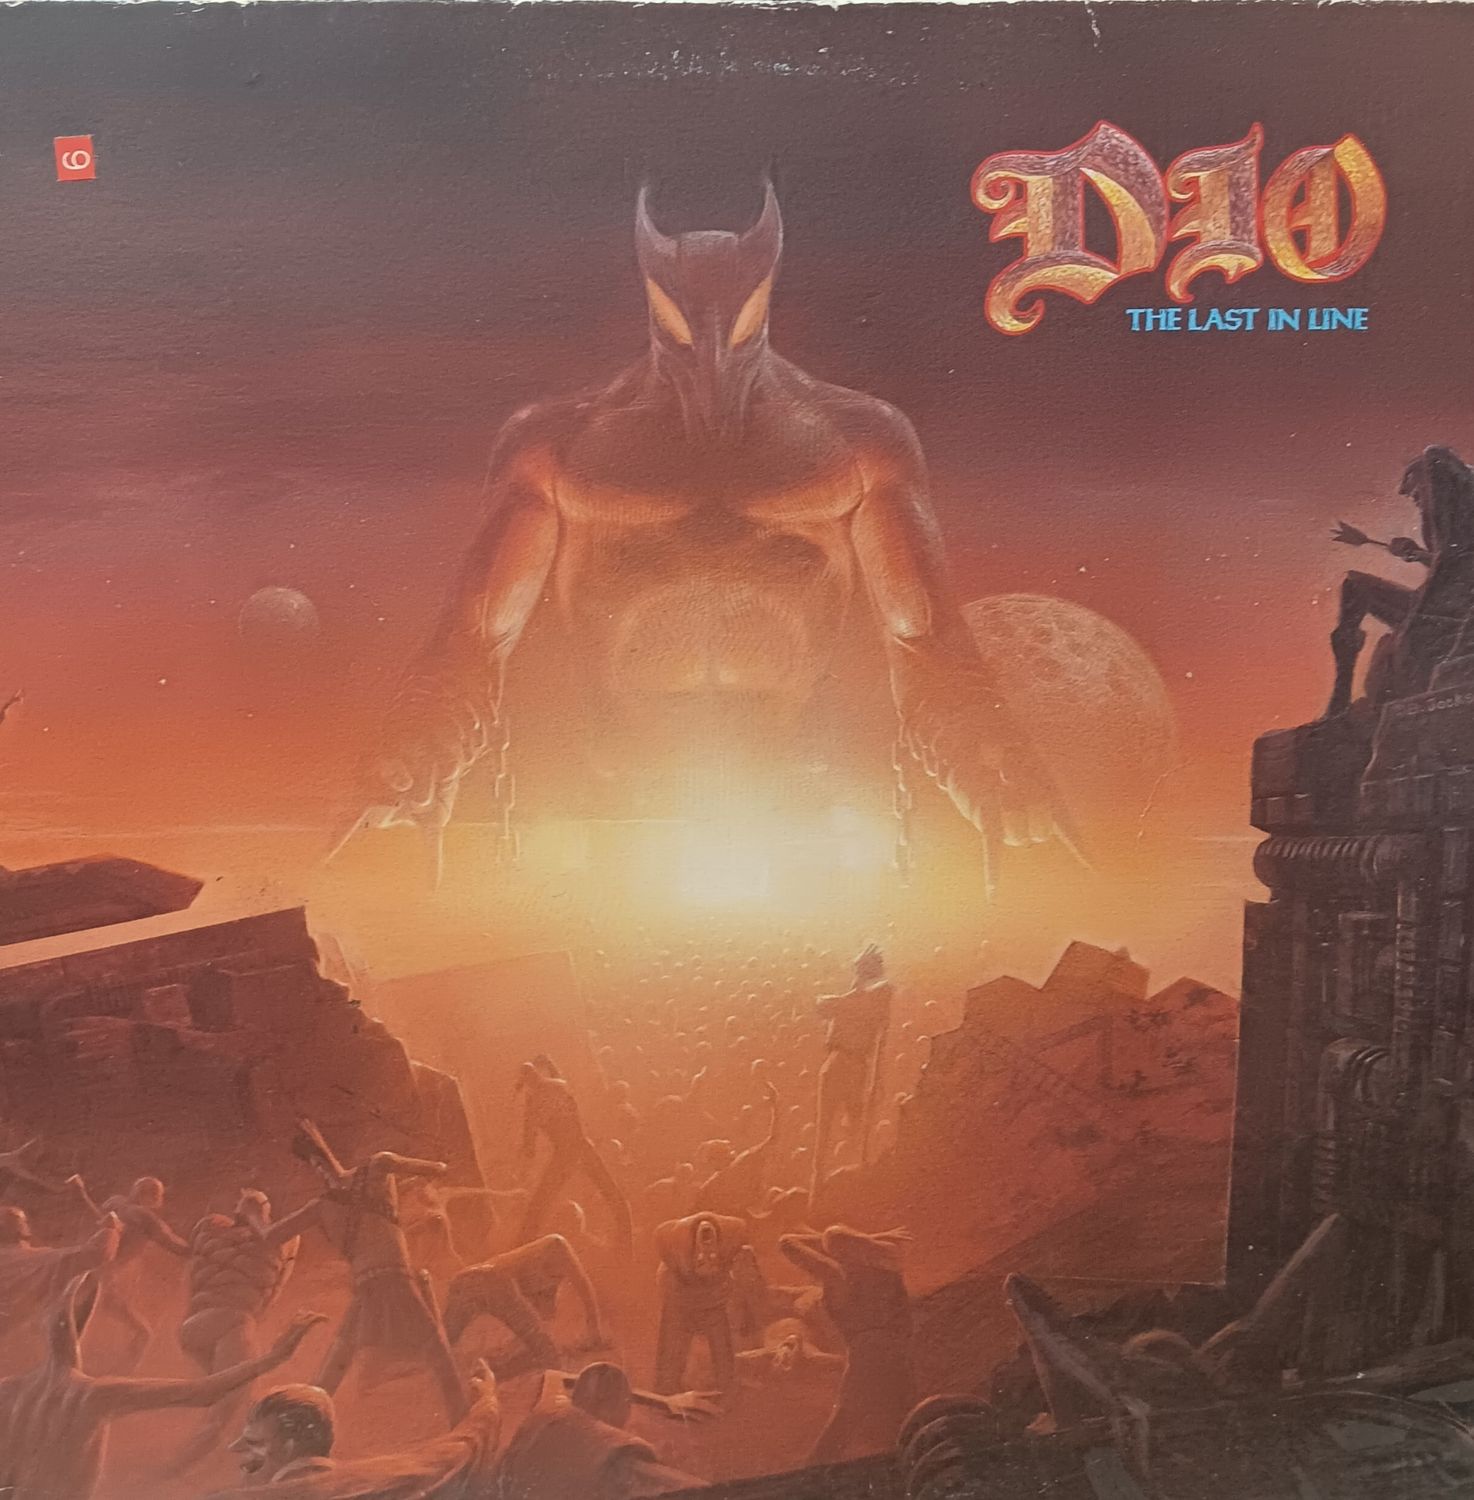 DIO - The last in line